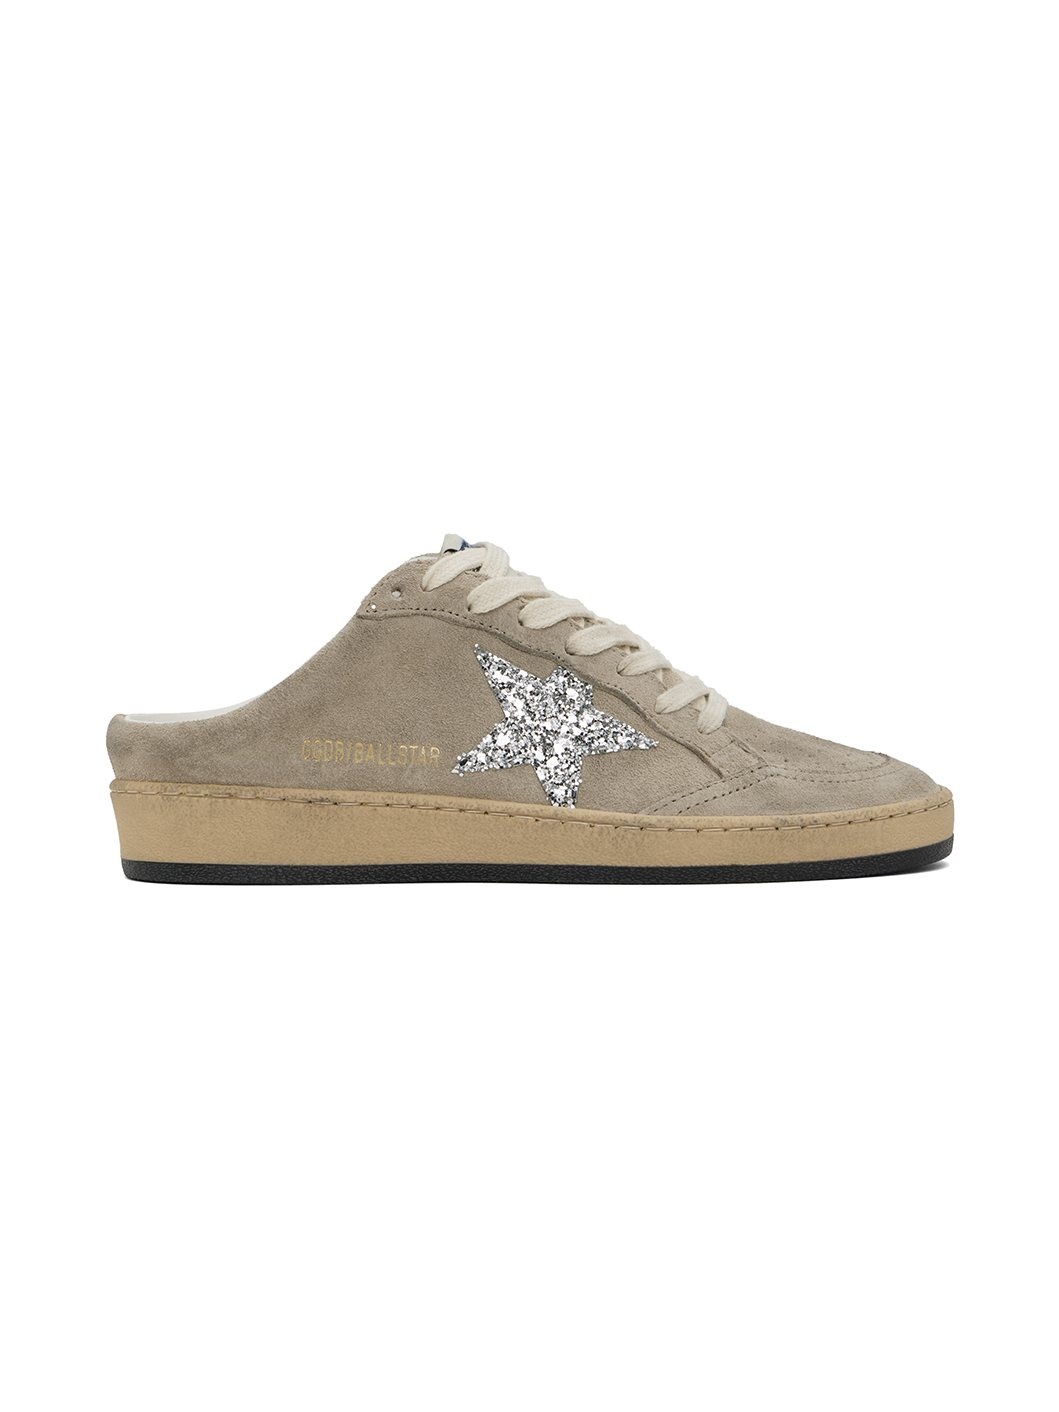 Taupe Ball Star Sabot Sneakers - 1